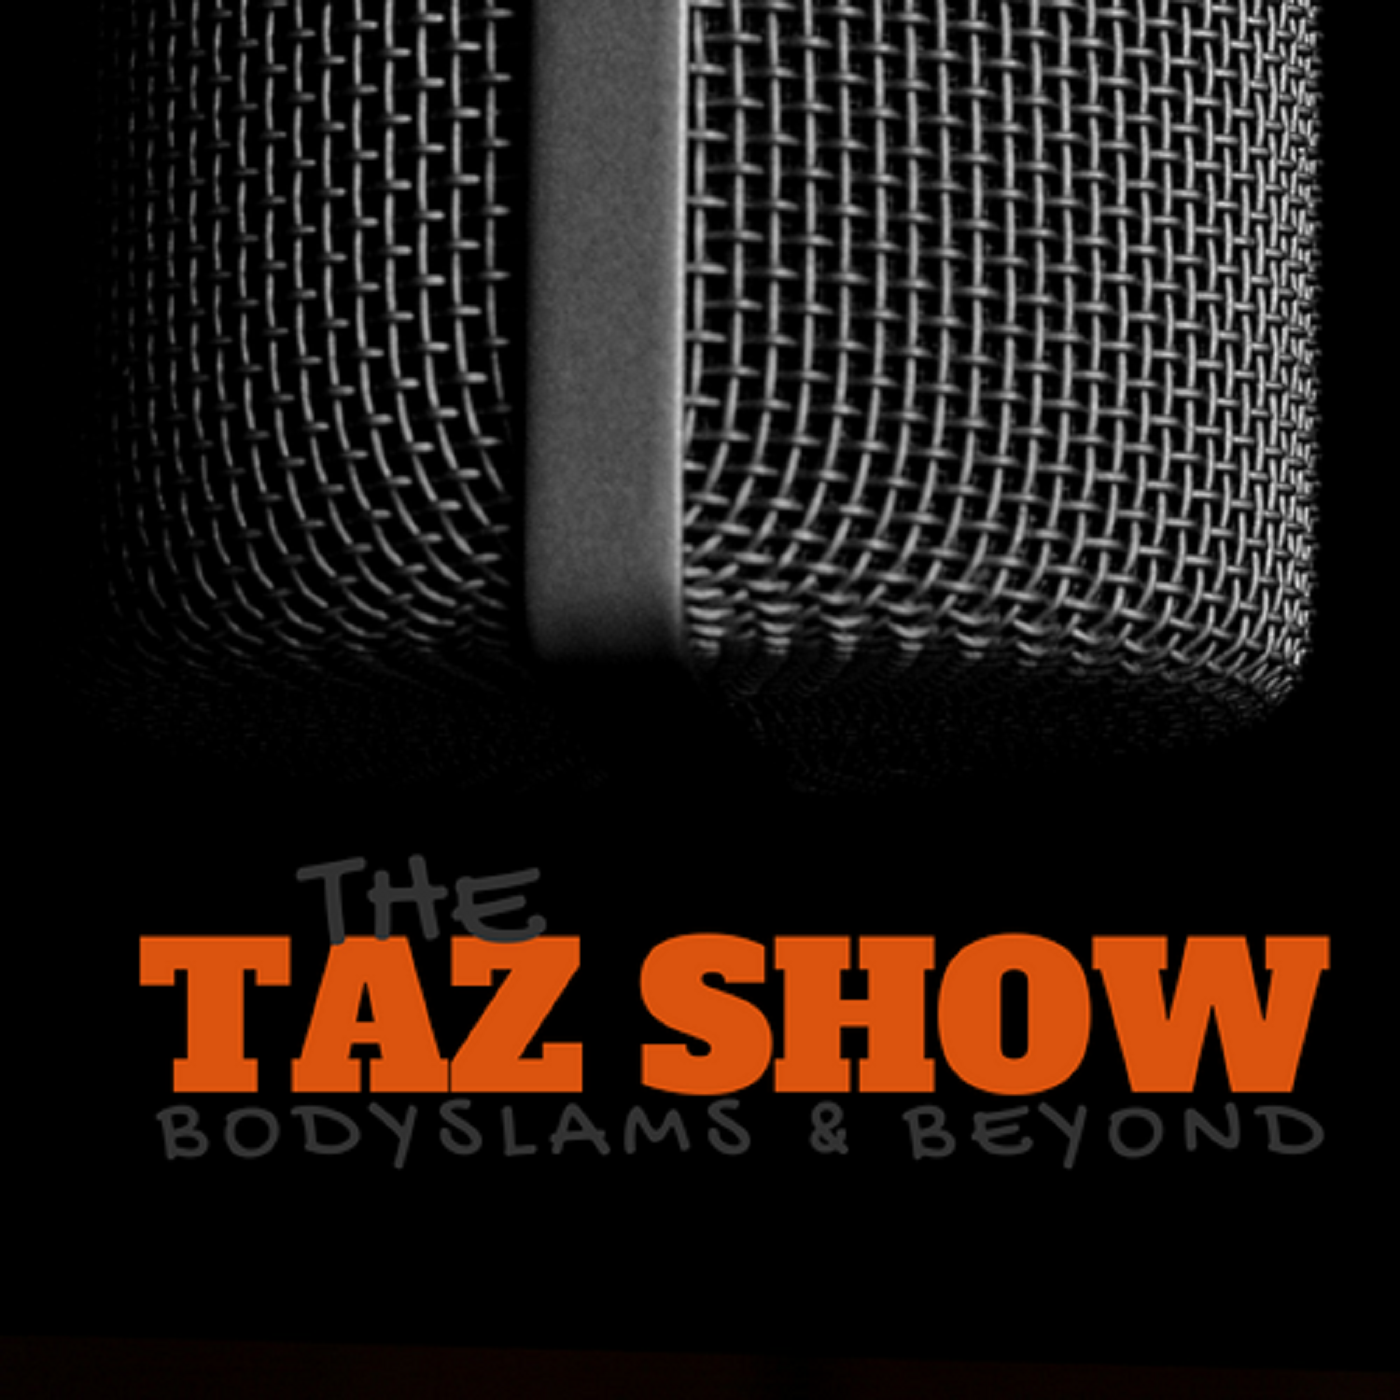 The Taz Show! Wednesday, October 14th, 2015